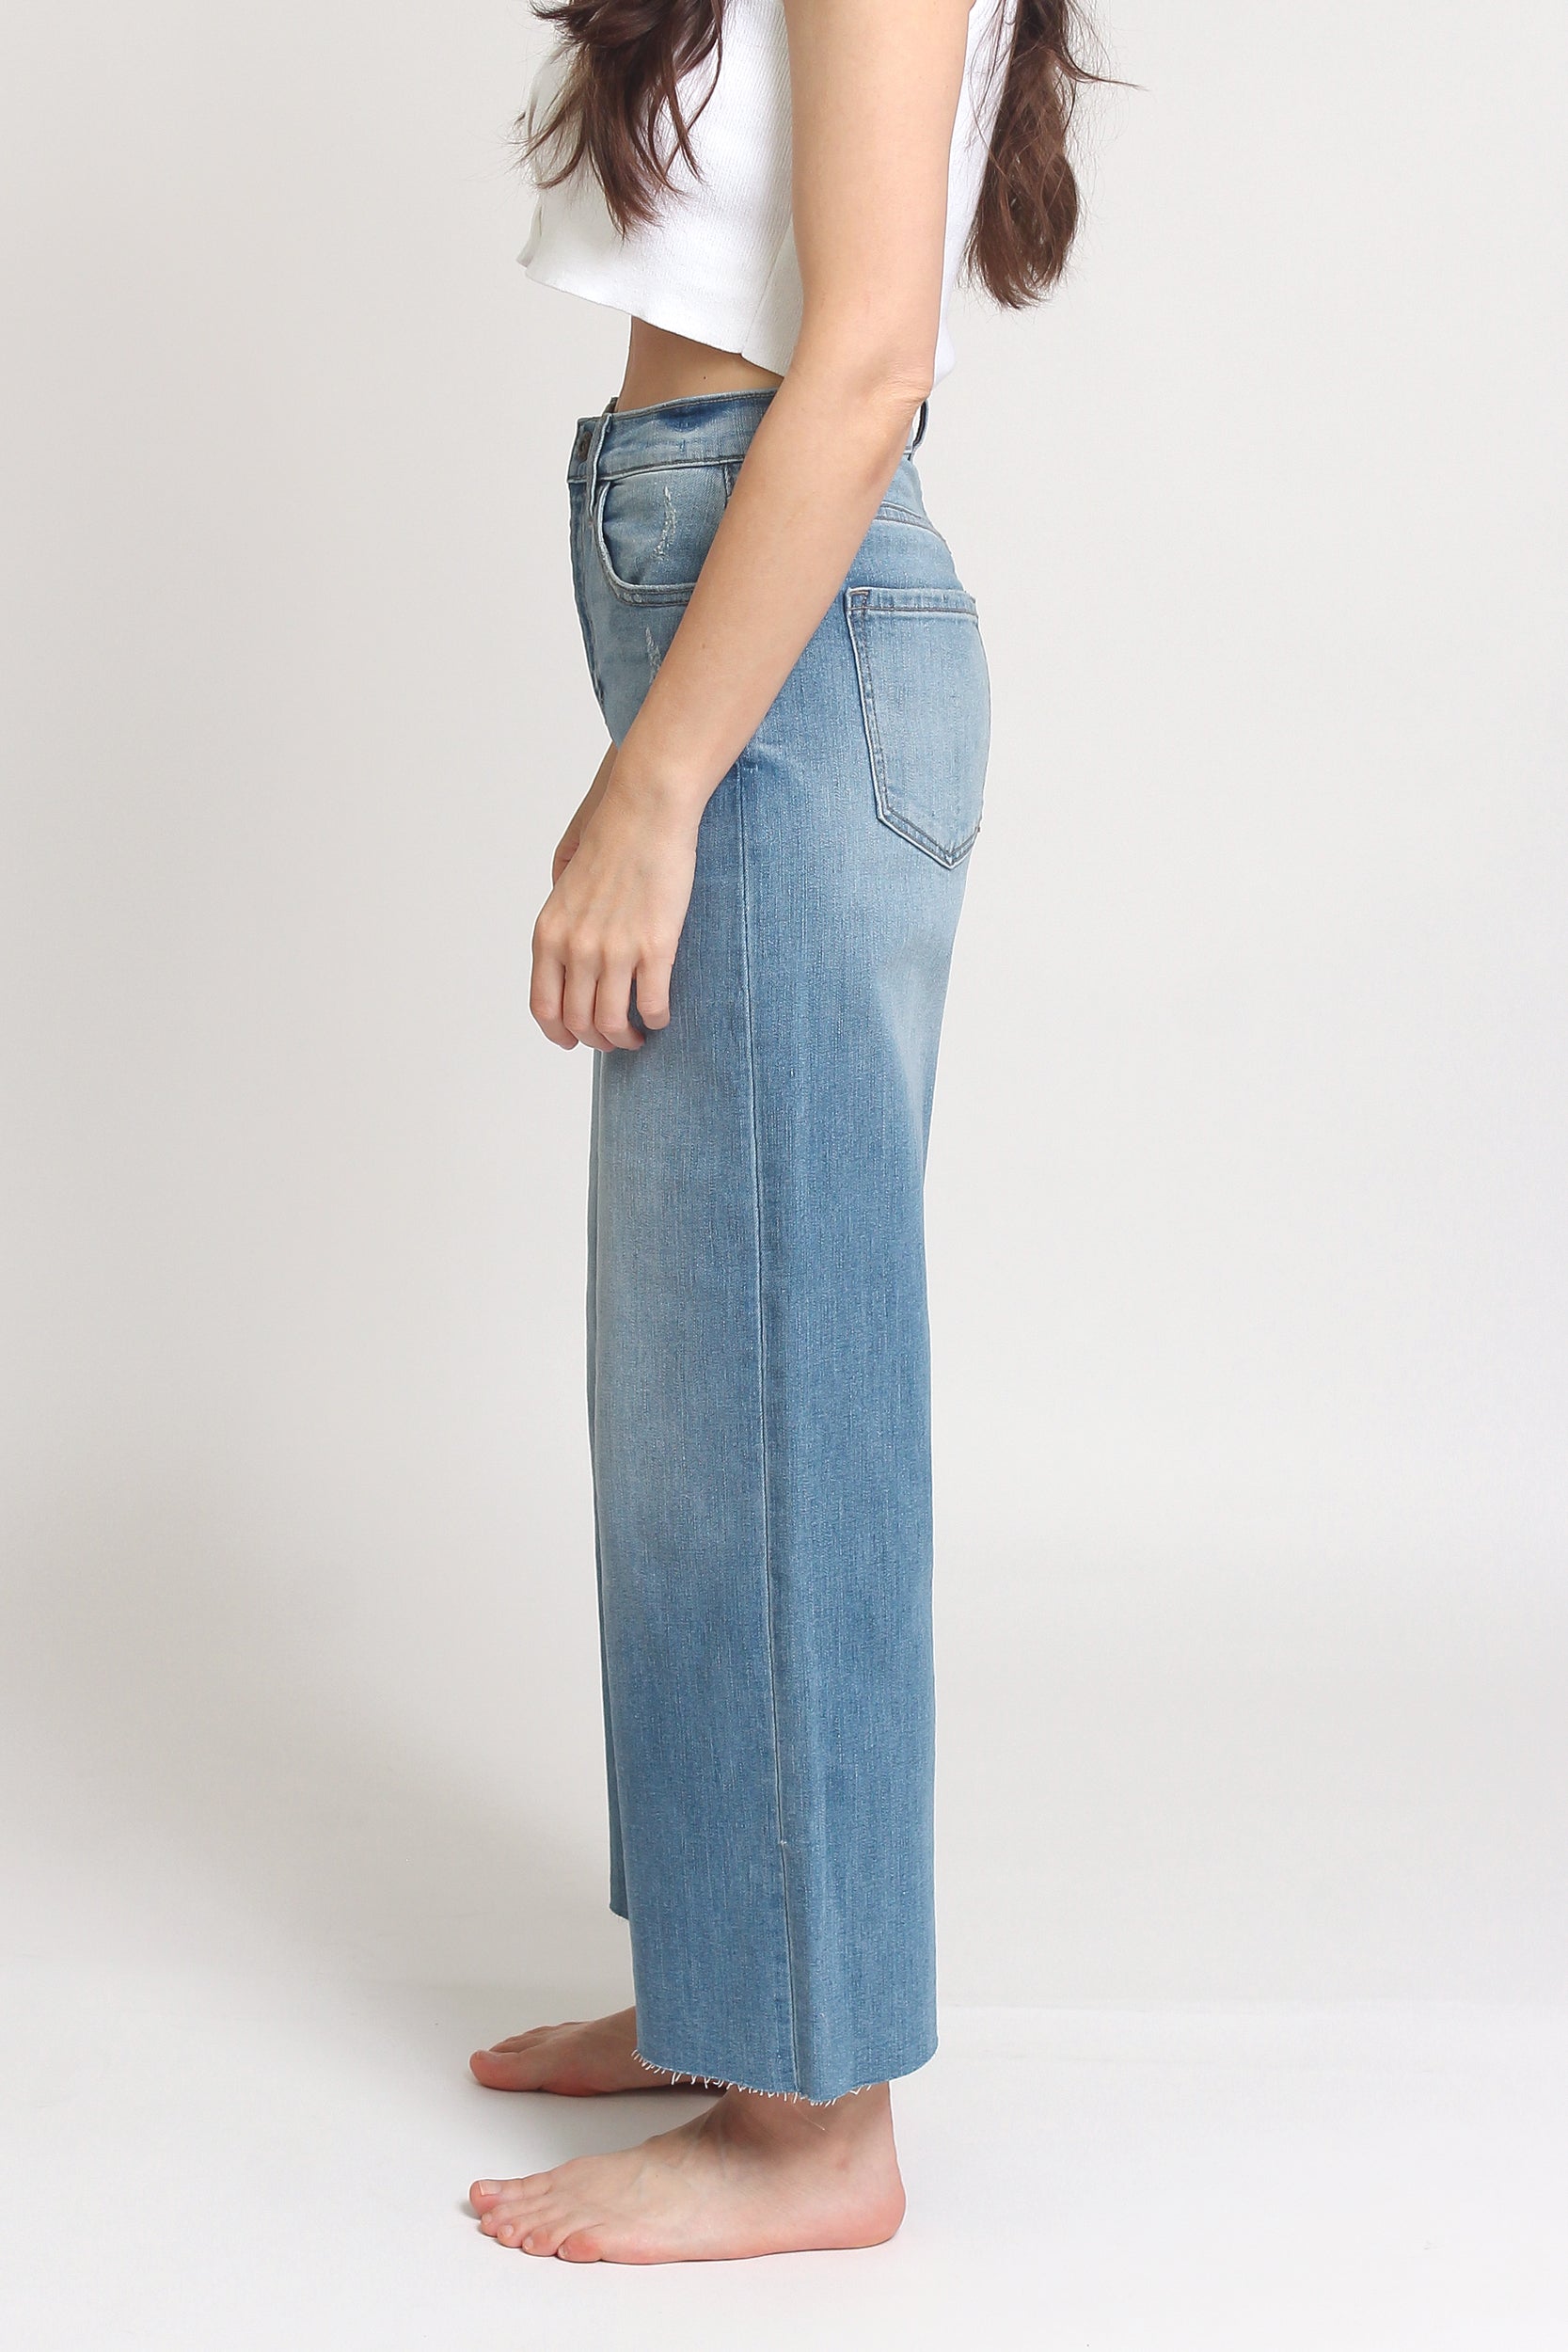 High waist, cut off cropped jeans, in Med/Light. Image 9